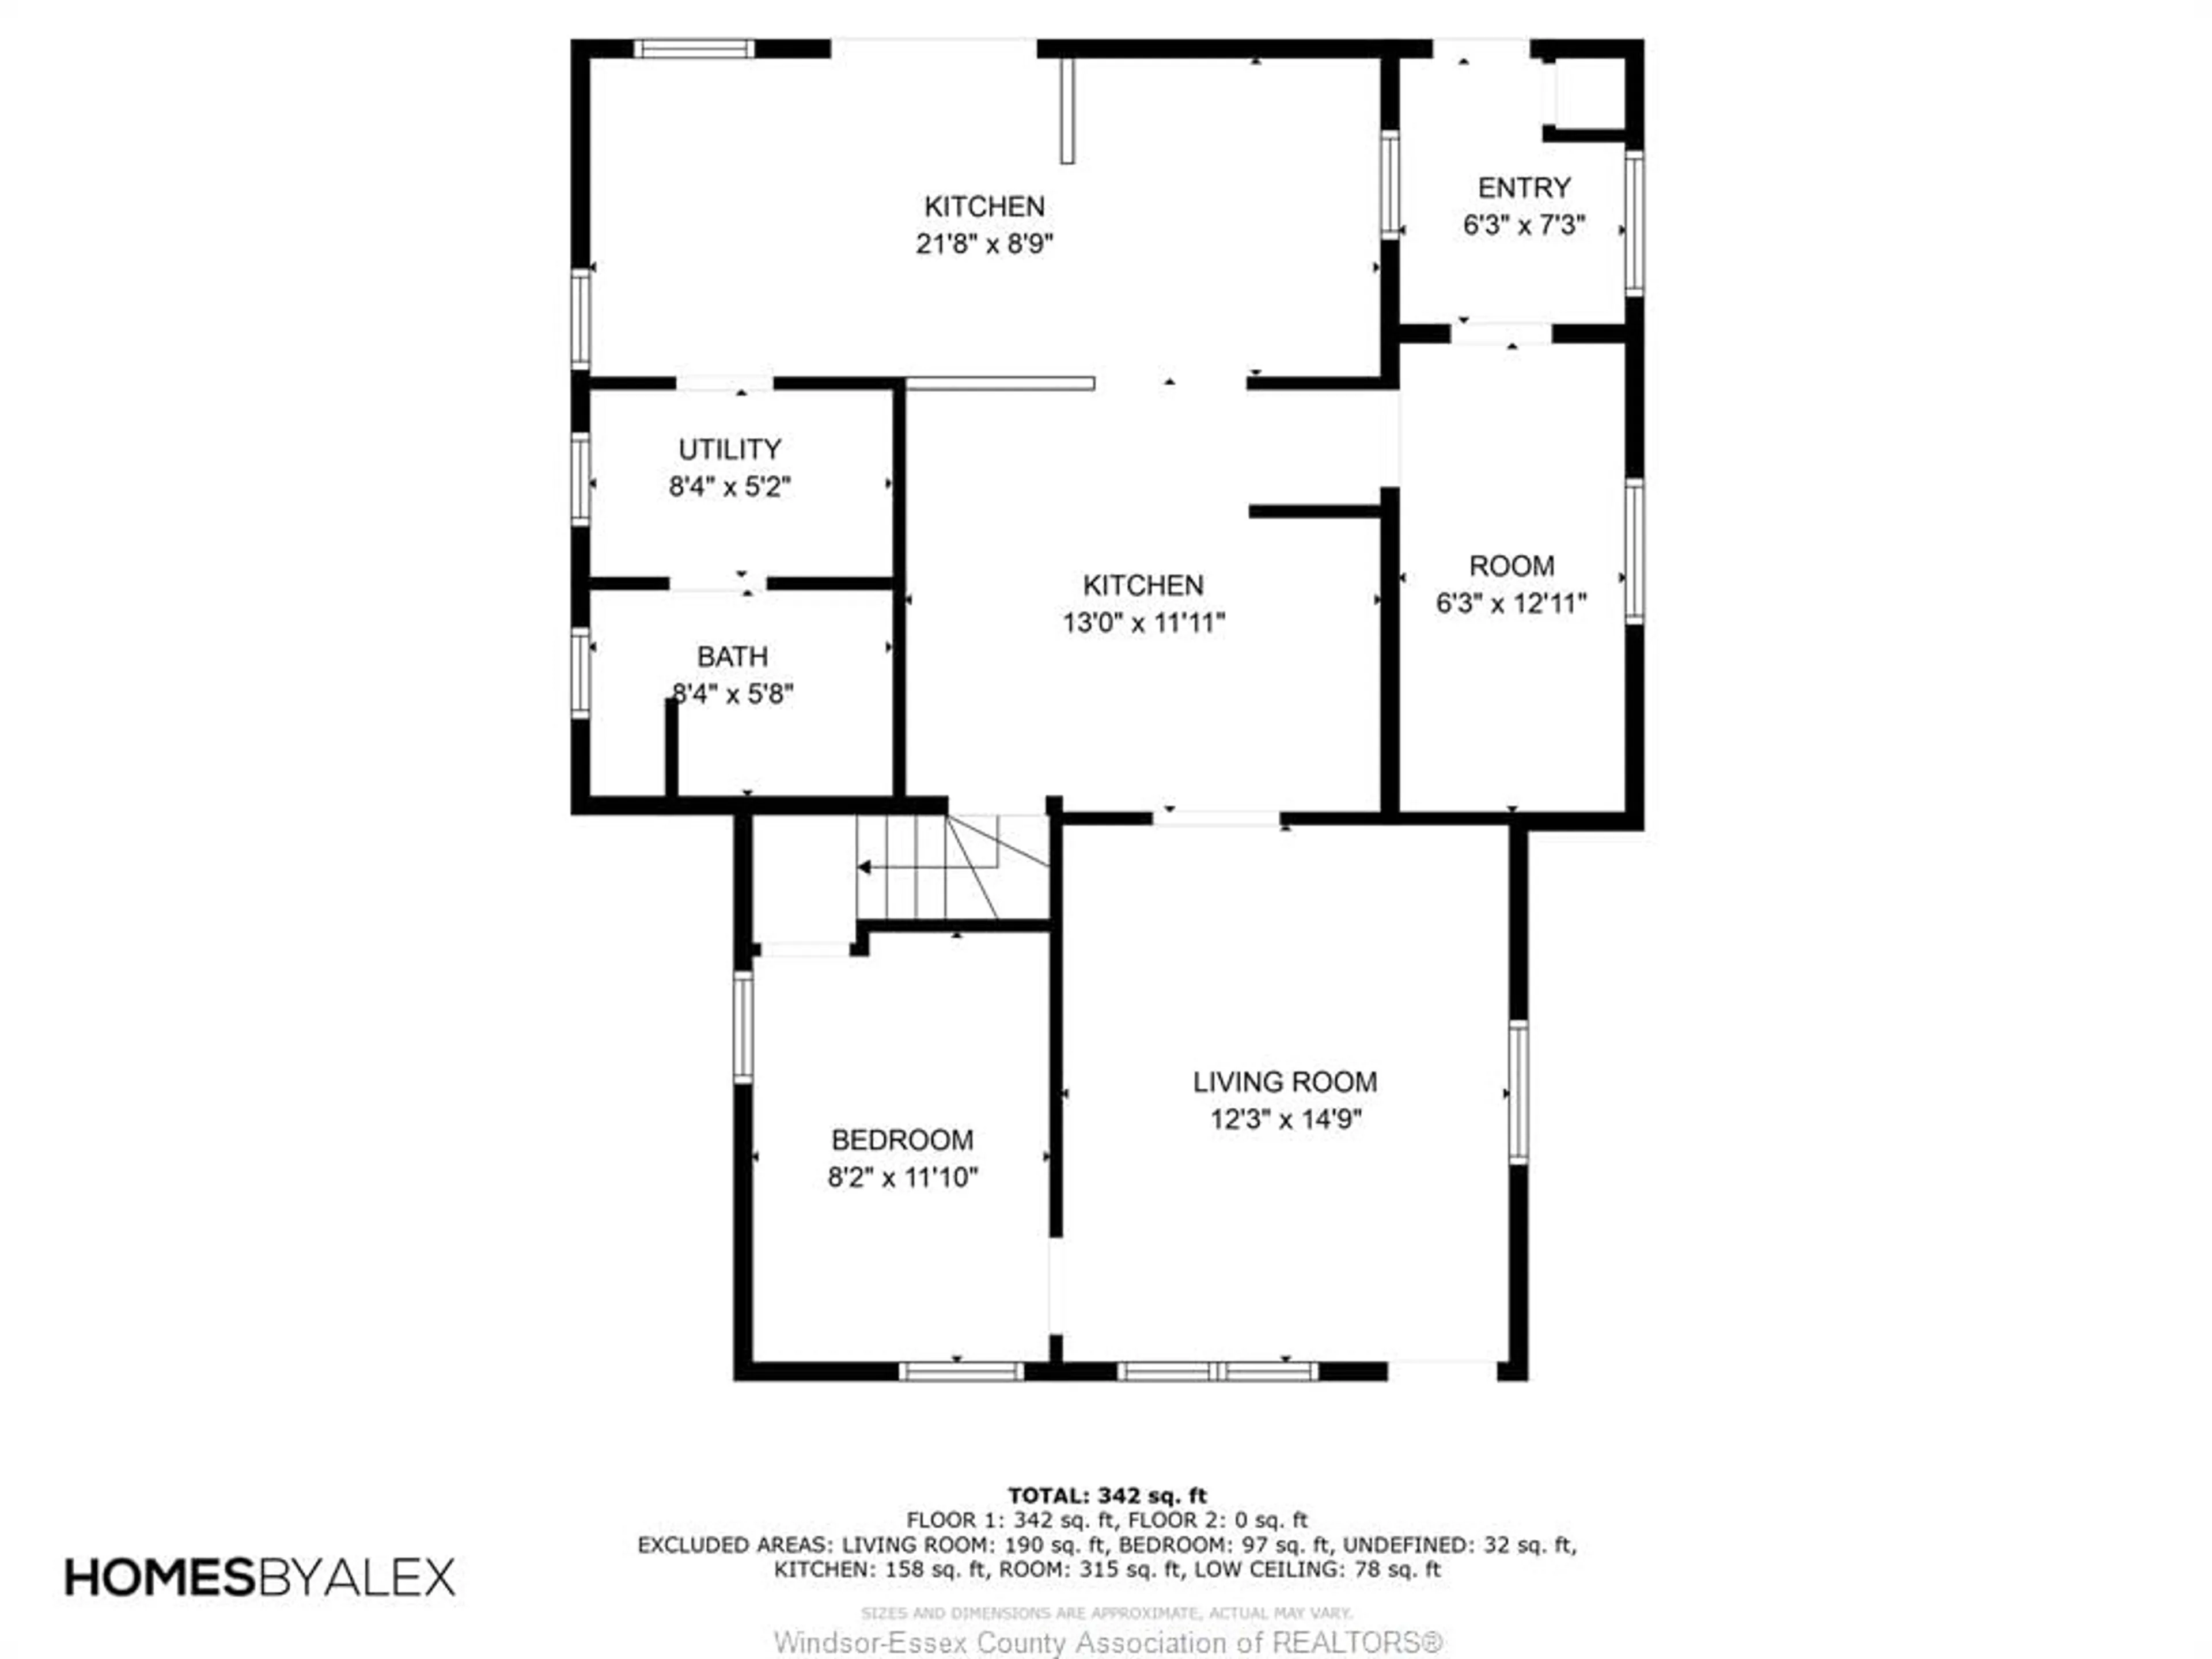 Floor plan for 7011 FORD, Comber Ontario N0P 1J0